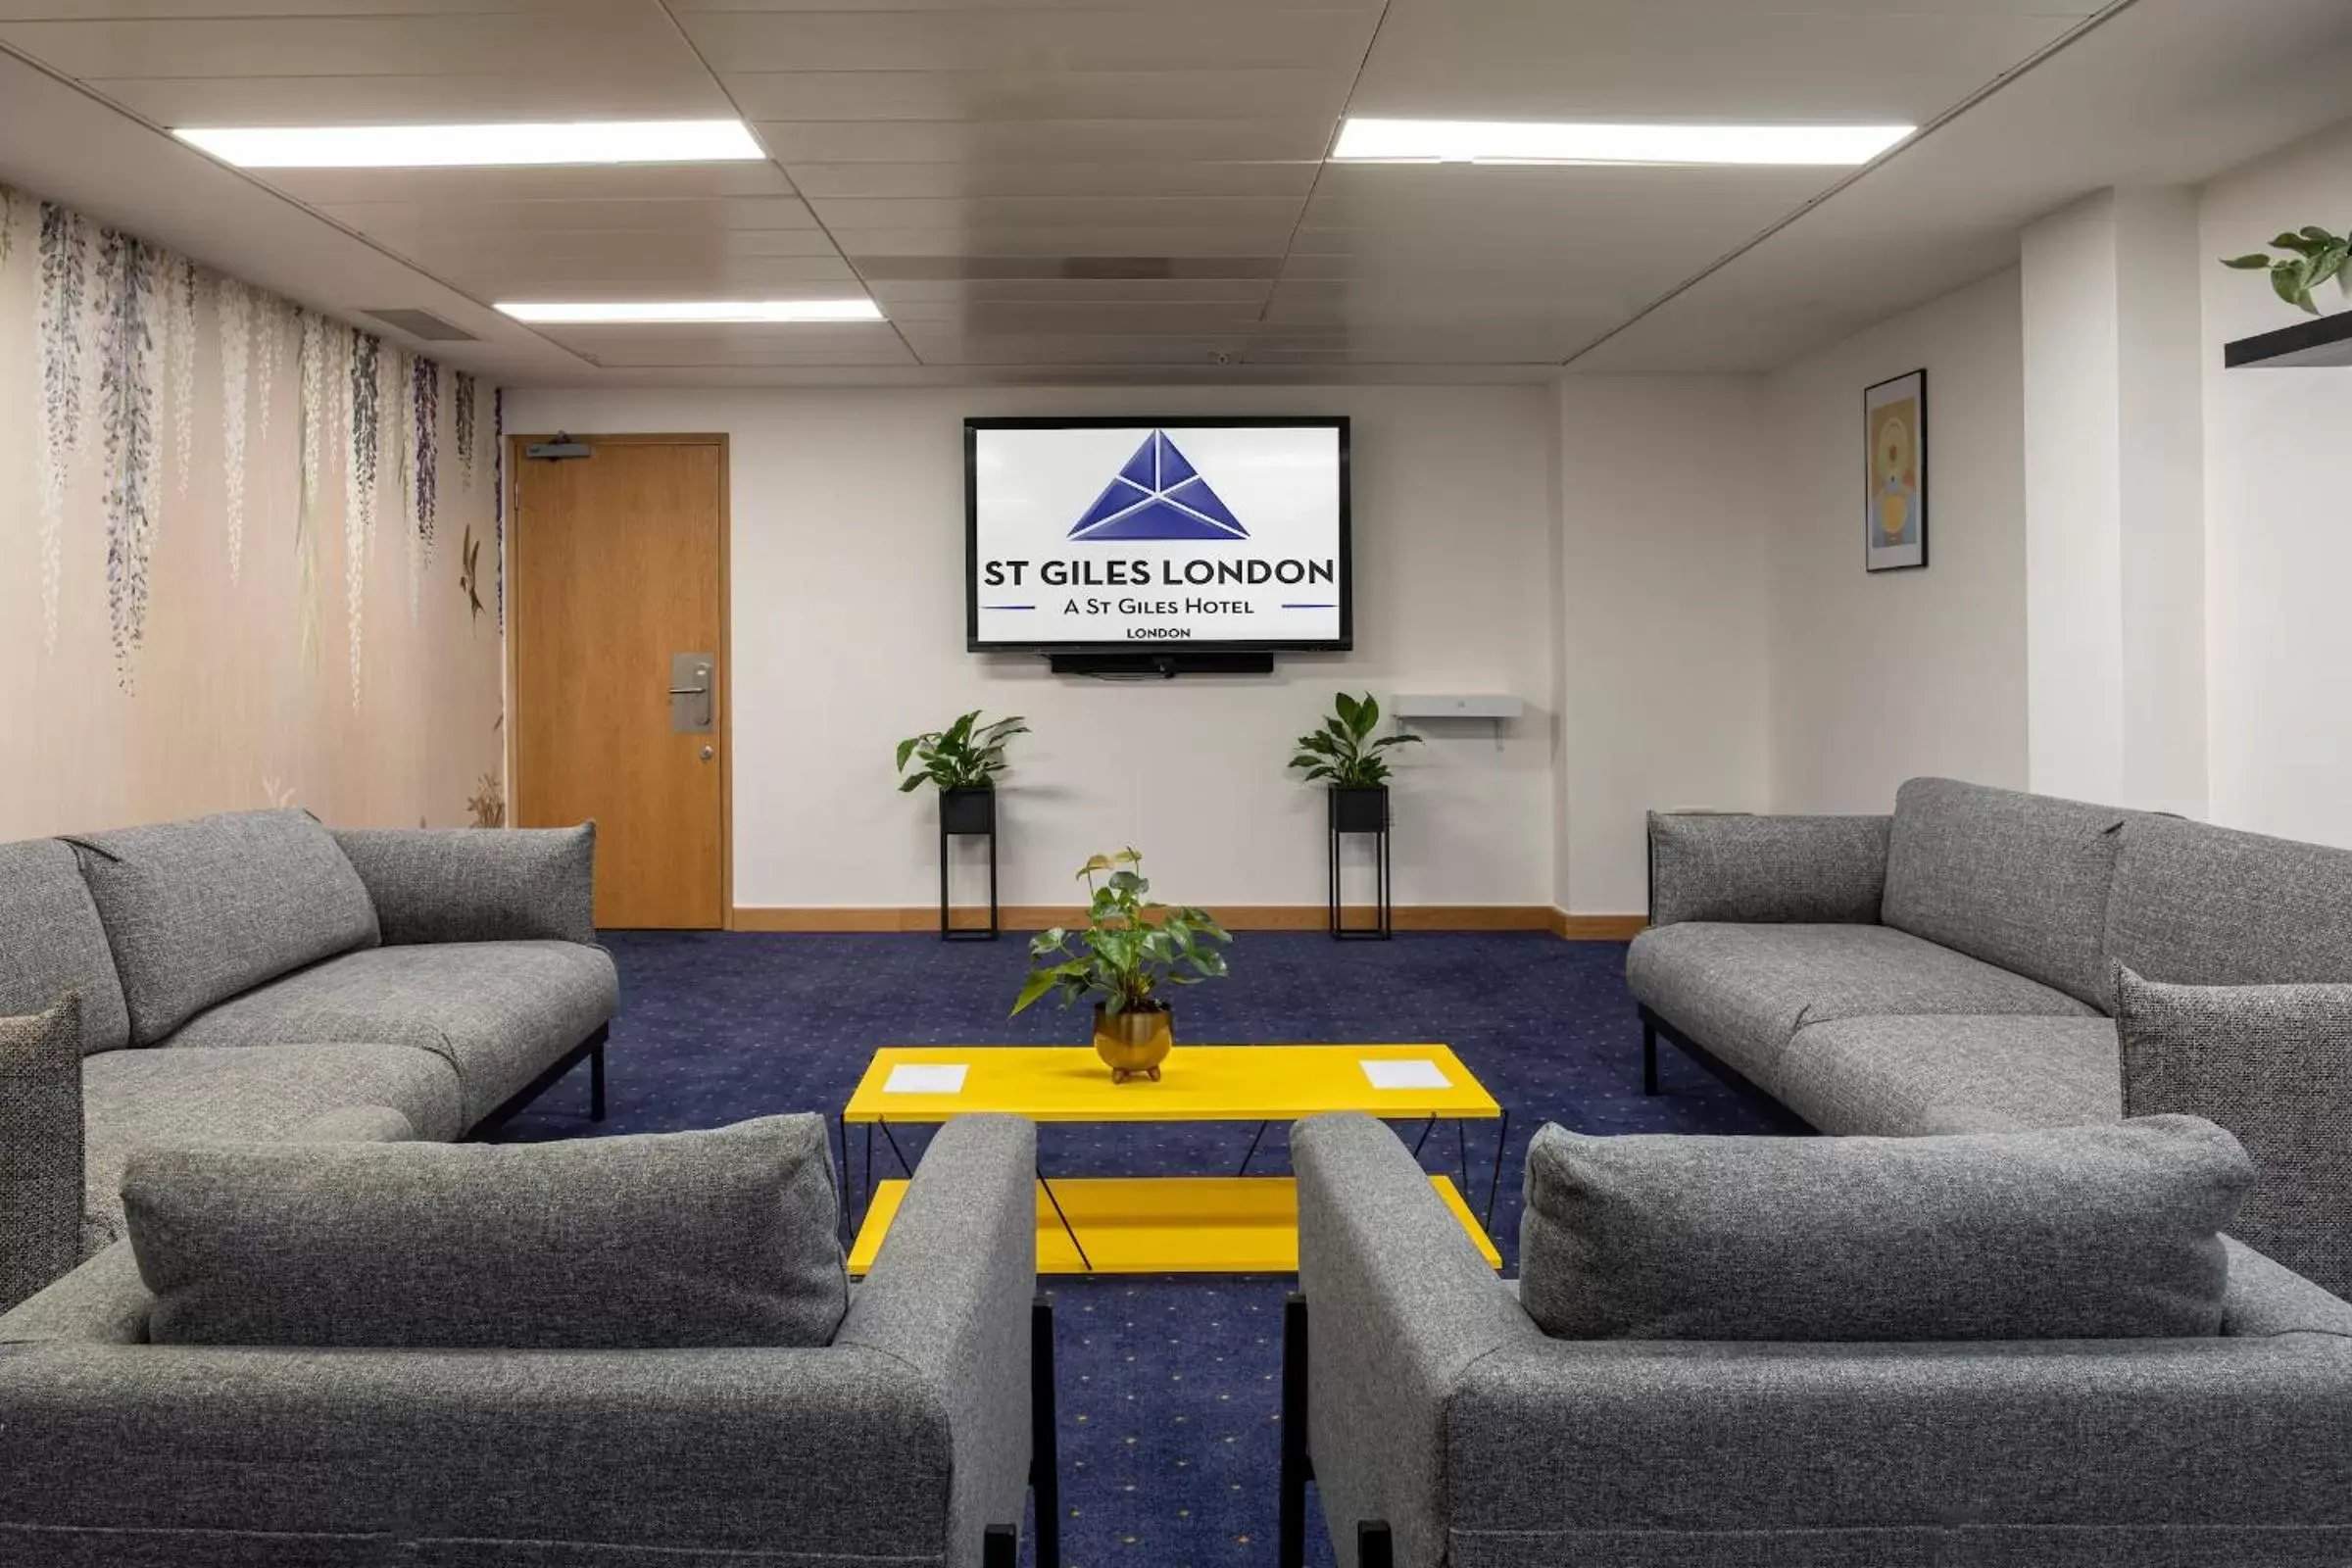 Meeting/conference room, Seating Area in St Giles London – A St Giles Hotel